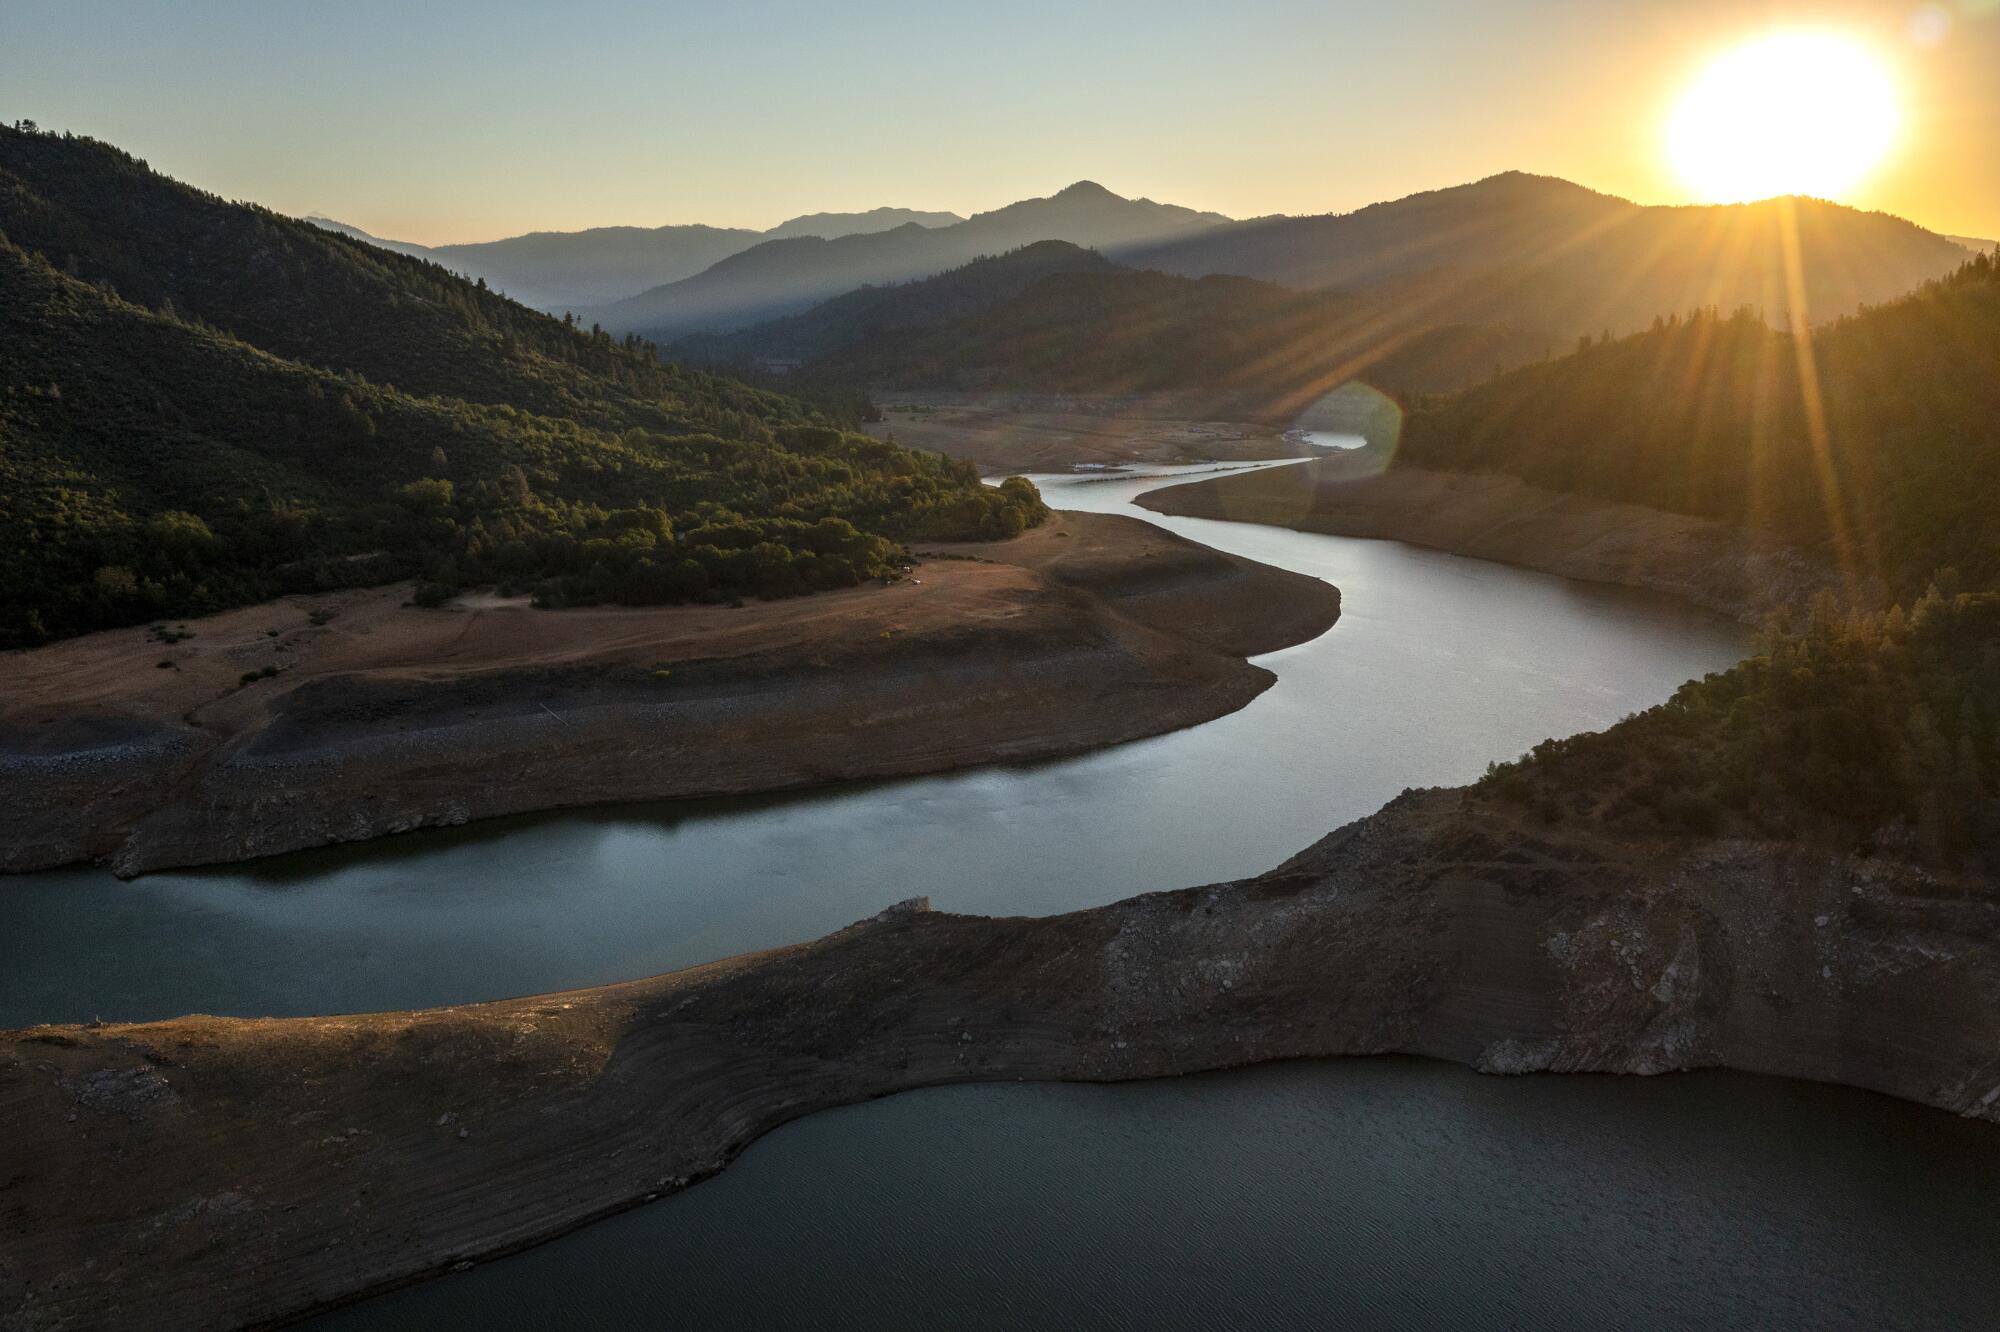 “Bathtub ring” is stark evidence of the falling water level at Lake Shasta.